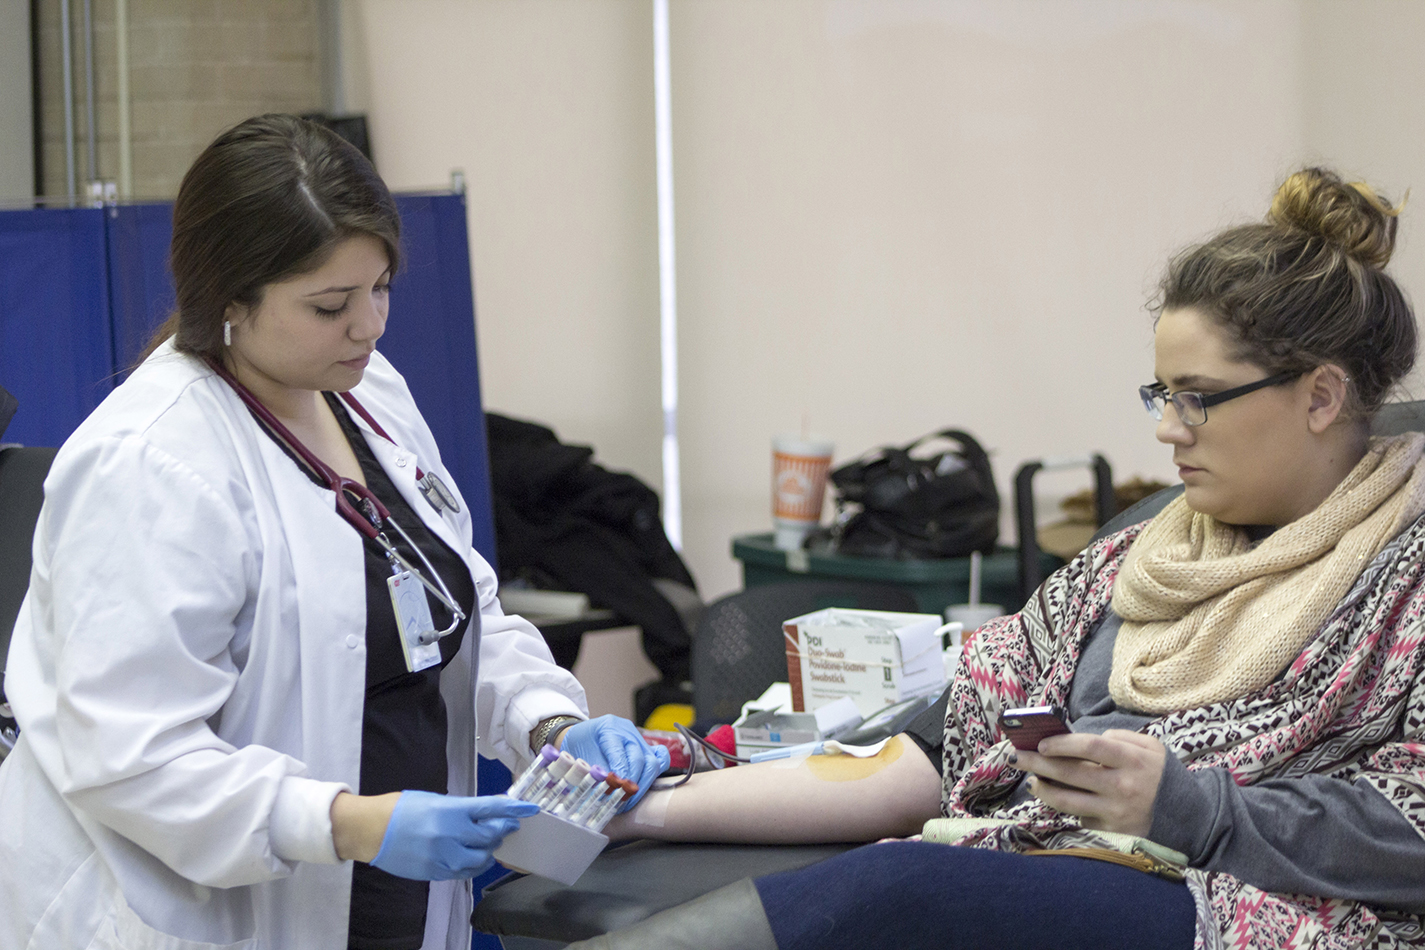 Health services offices on all campuses sponsor opportunities for students, faculty and staff to donate blood year-round and provide other services.